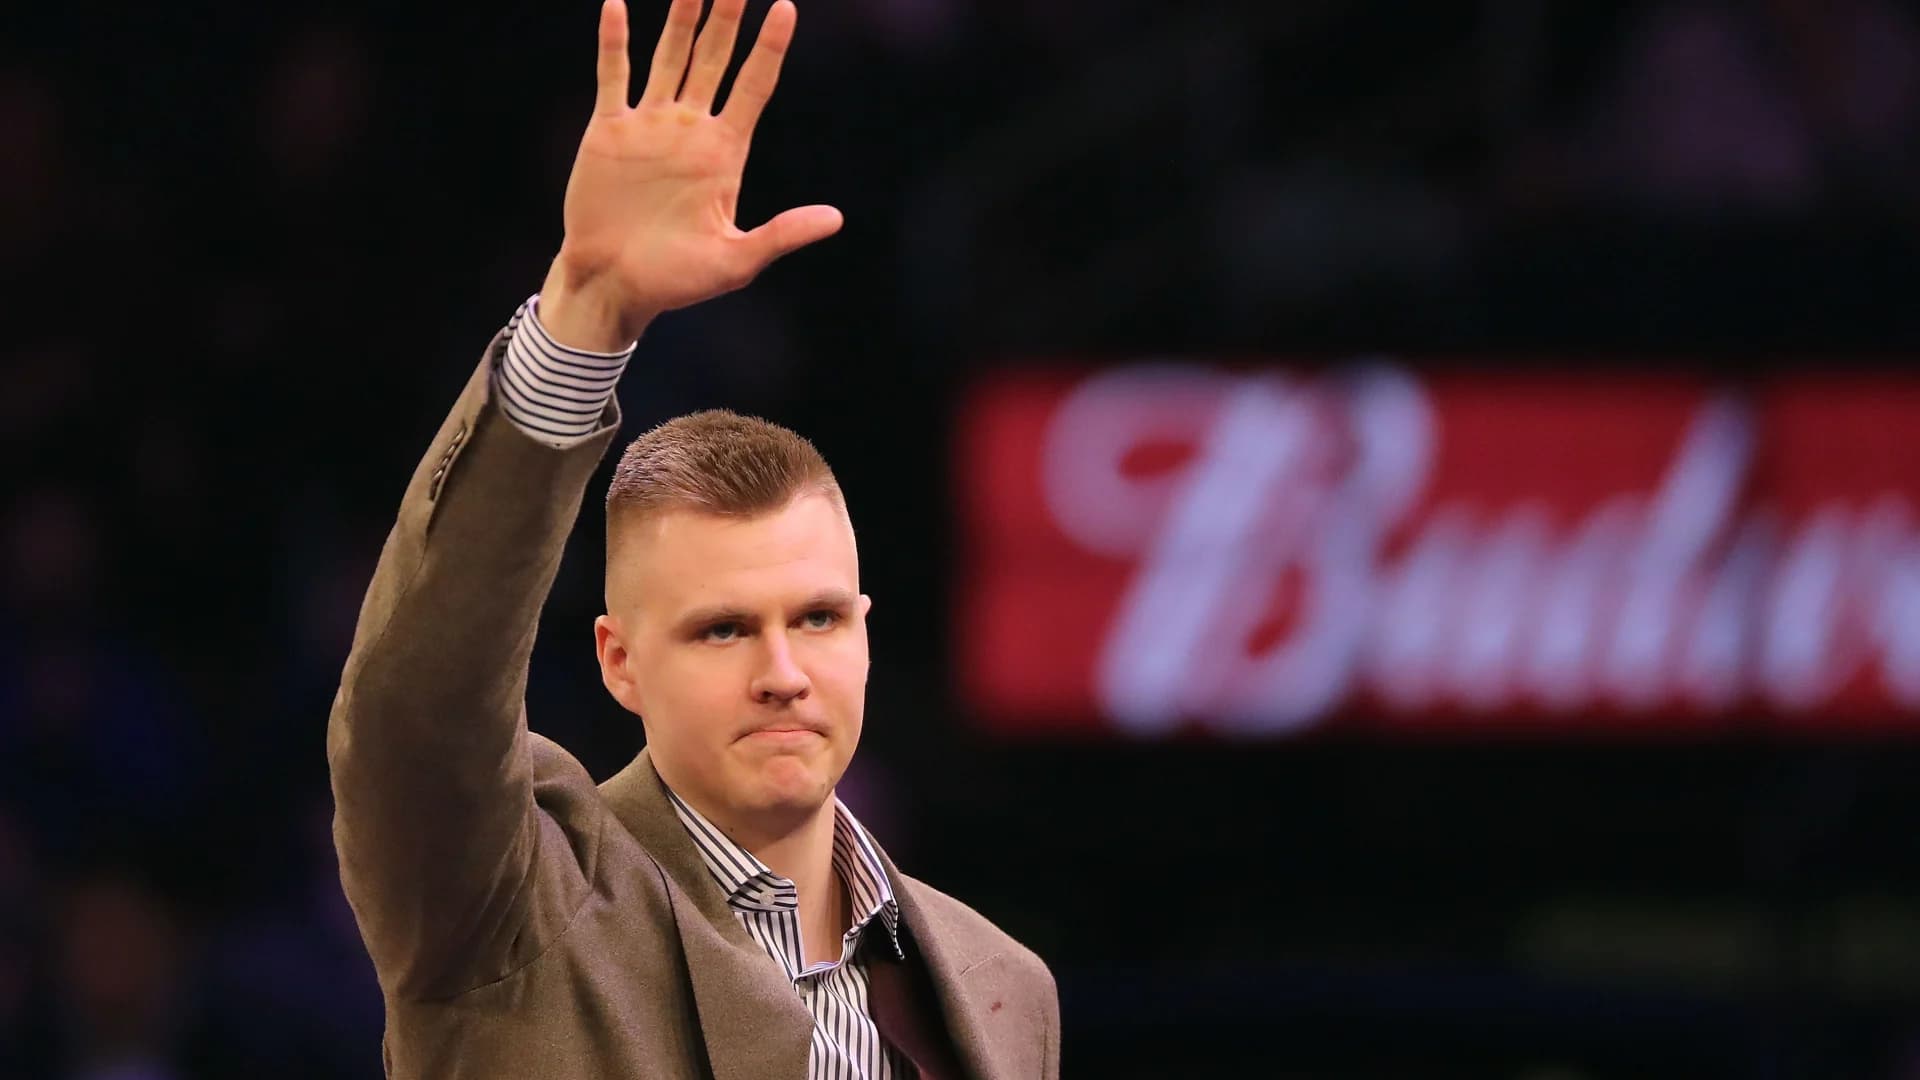 Knicks deal Porzingis to Dallas, say he requested a trade